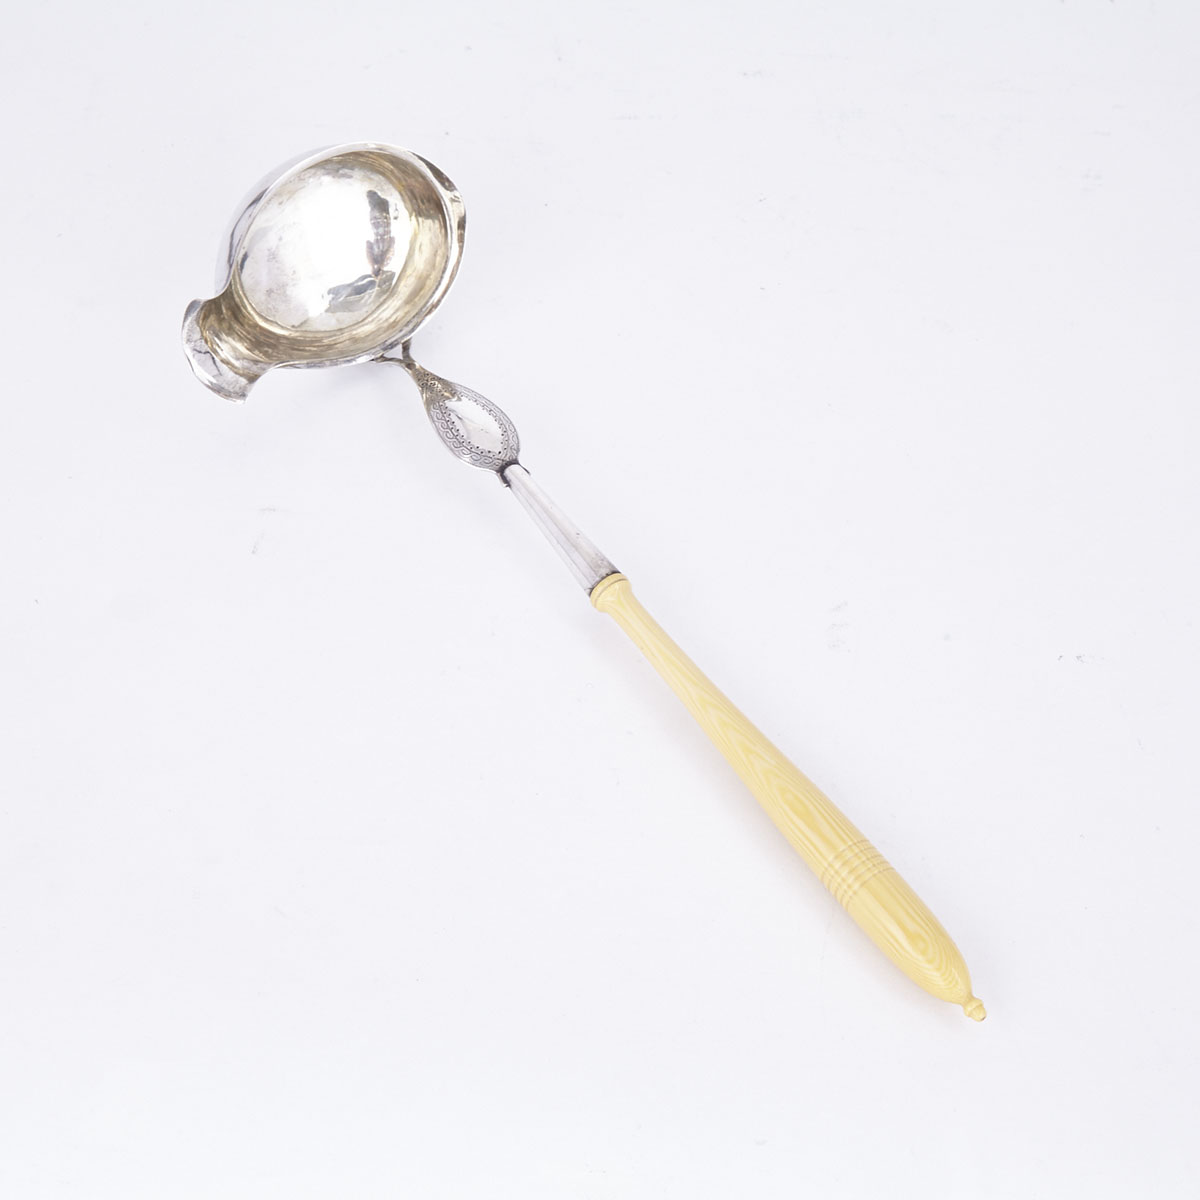 Continental Silver and Carved Ivory Ladle, probably German, 19th century